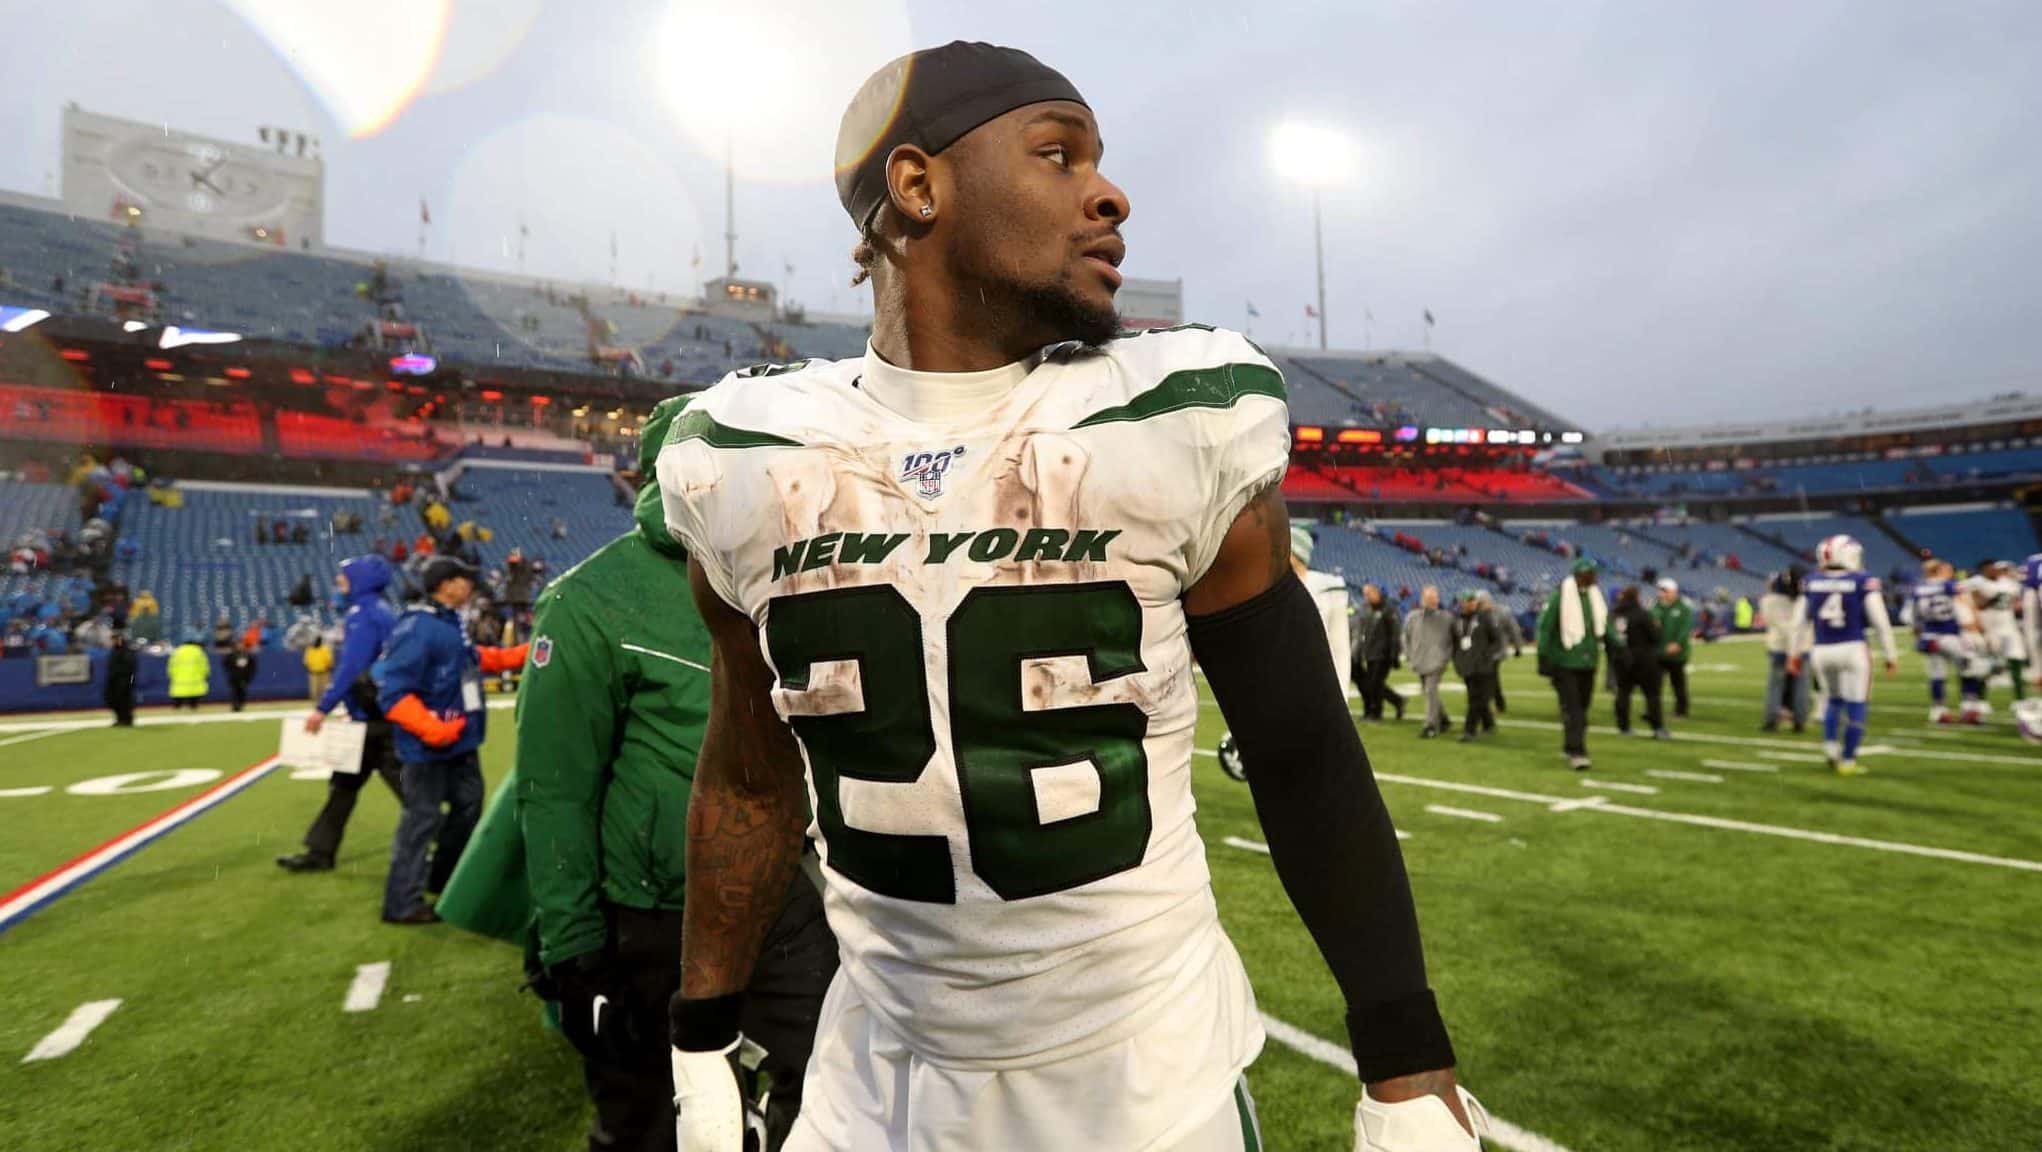 ORCHARD PARK, NEW YORK - DECEMBER 29: Le'Veon Bell #26 of the New York Jets walks off the field after an NFL game against the Buffalo Bills at New Era Field on December 29, 2019 in Orchard Park, New York.